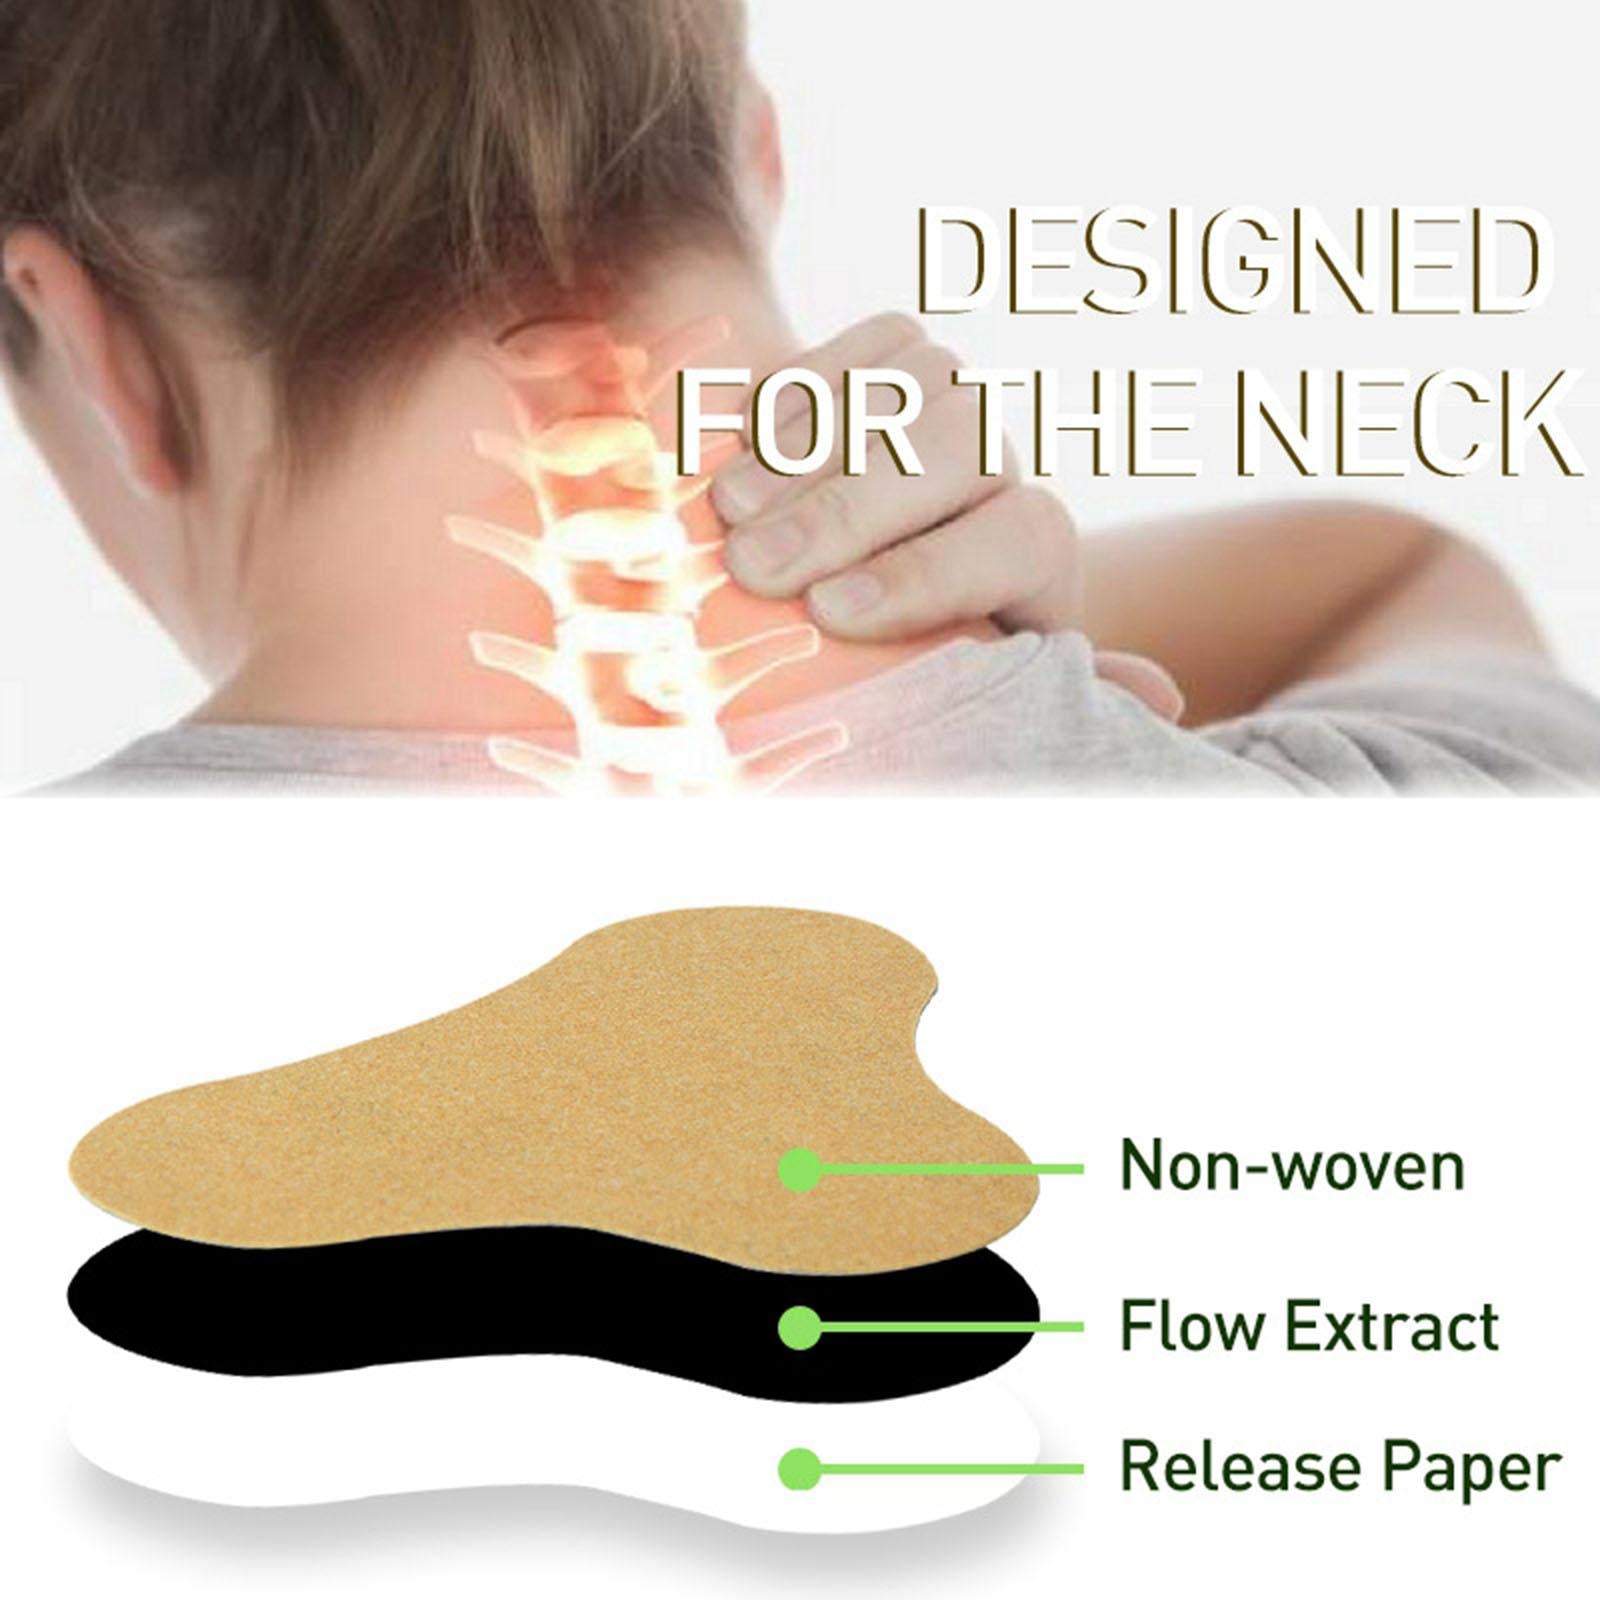 12 Sheets Natural Cervical Patch Relaxing Pain Plaster Sticker Self Adhesive